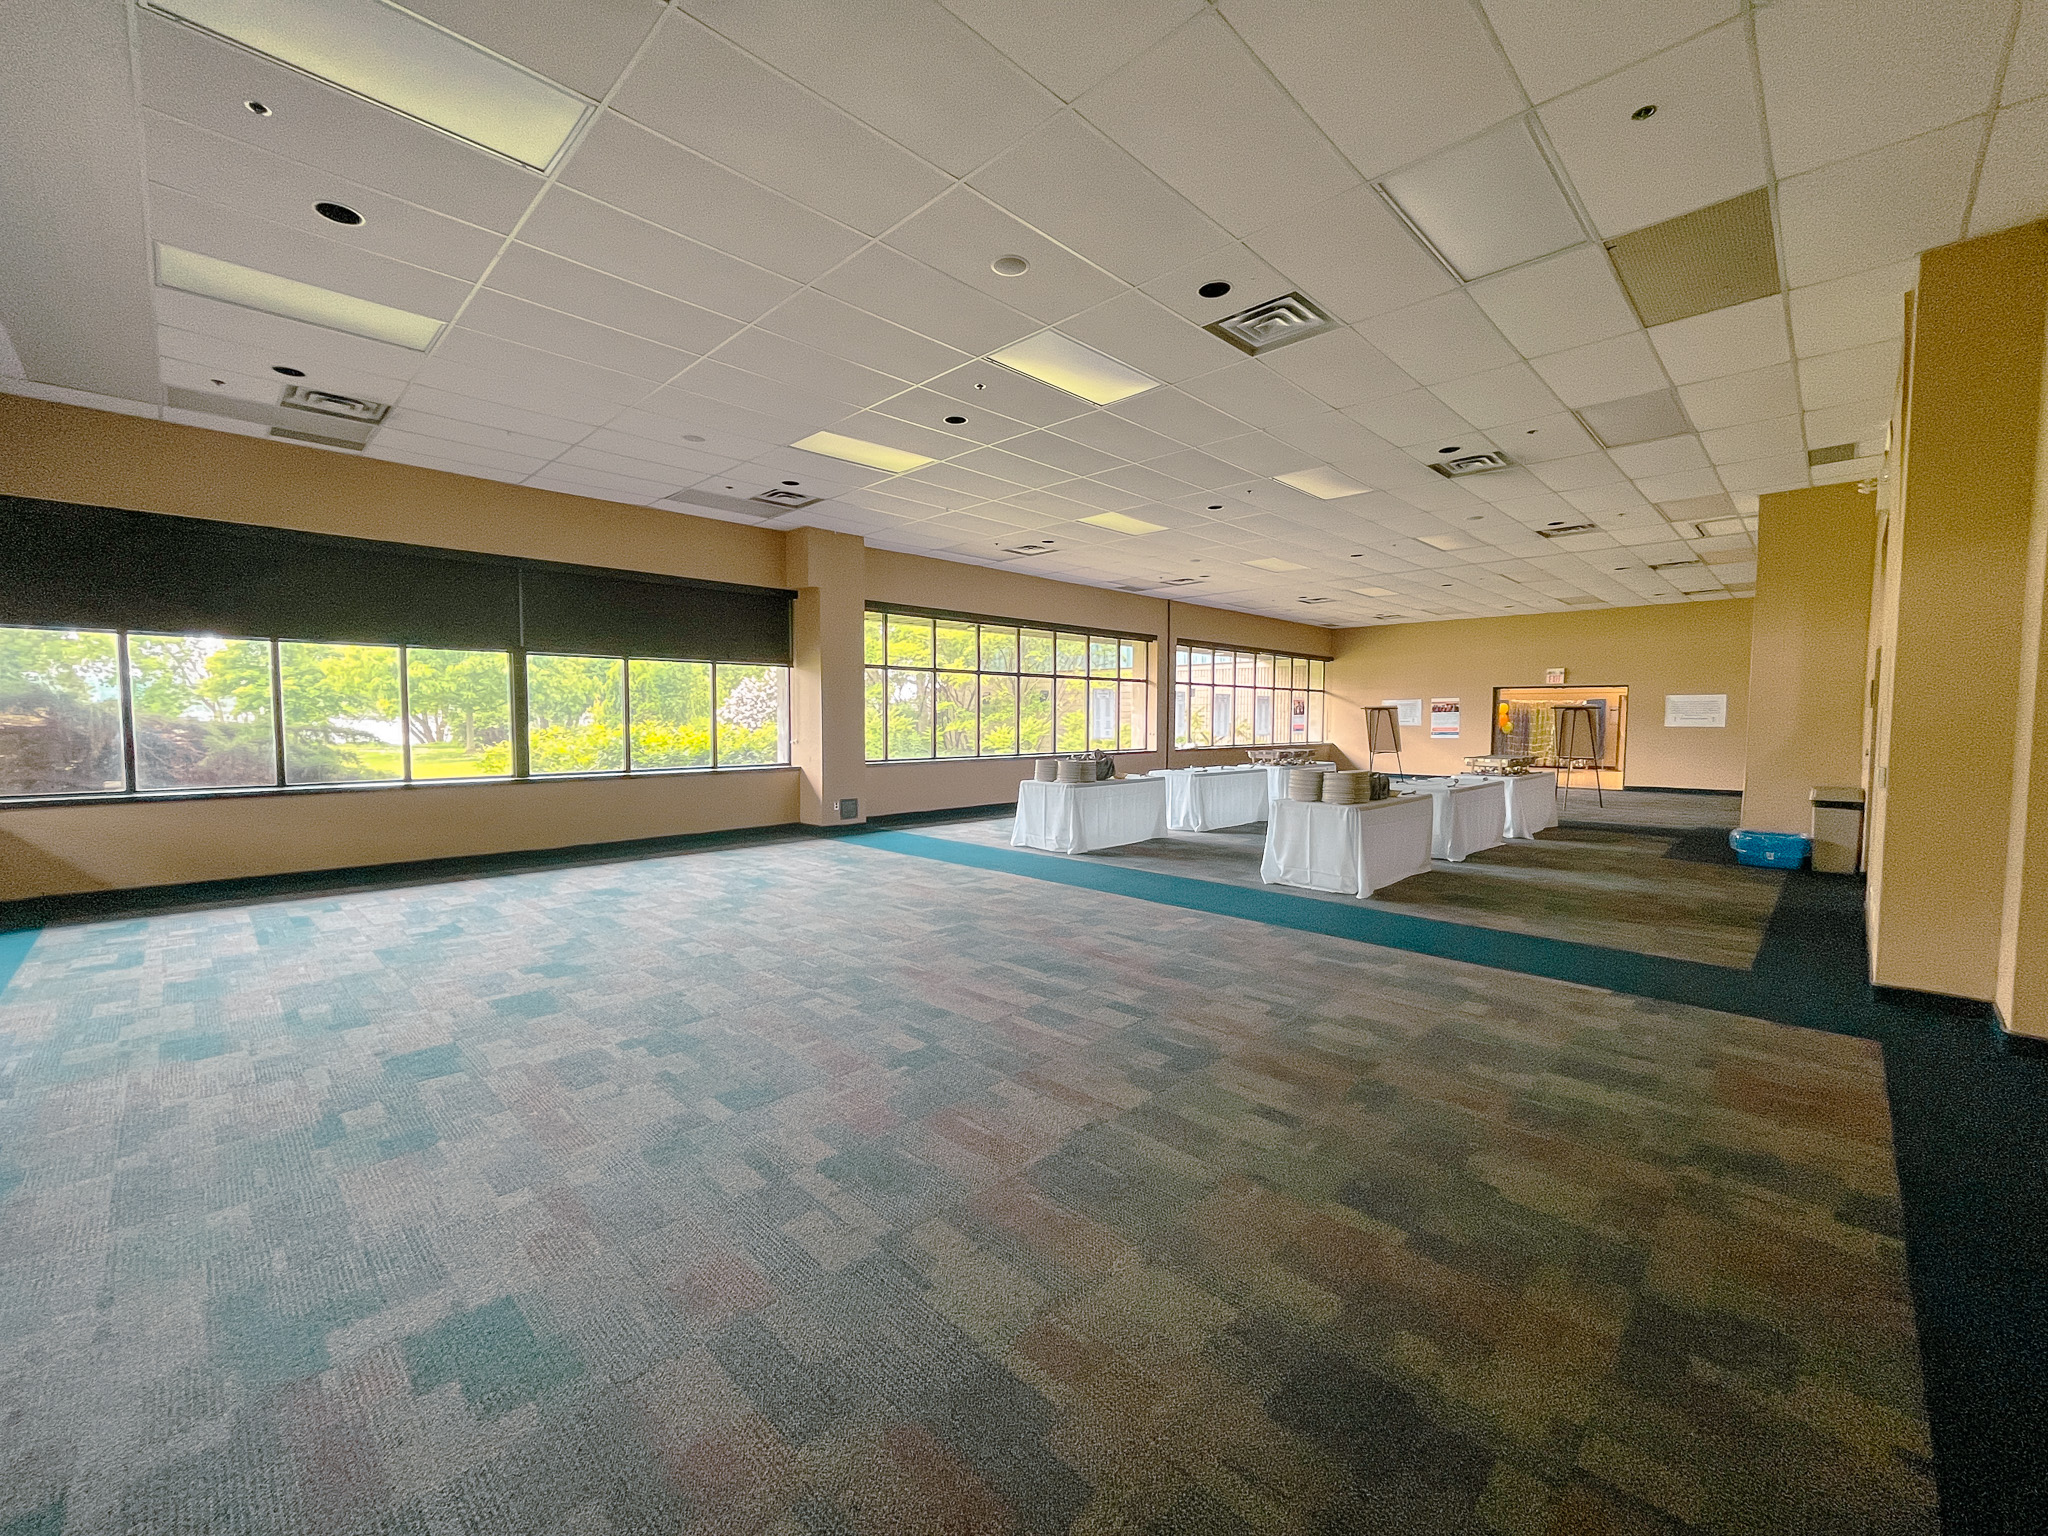 Image of banquet halls with carpet floors